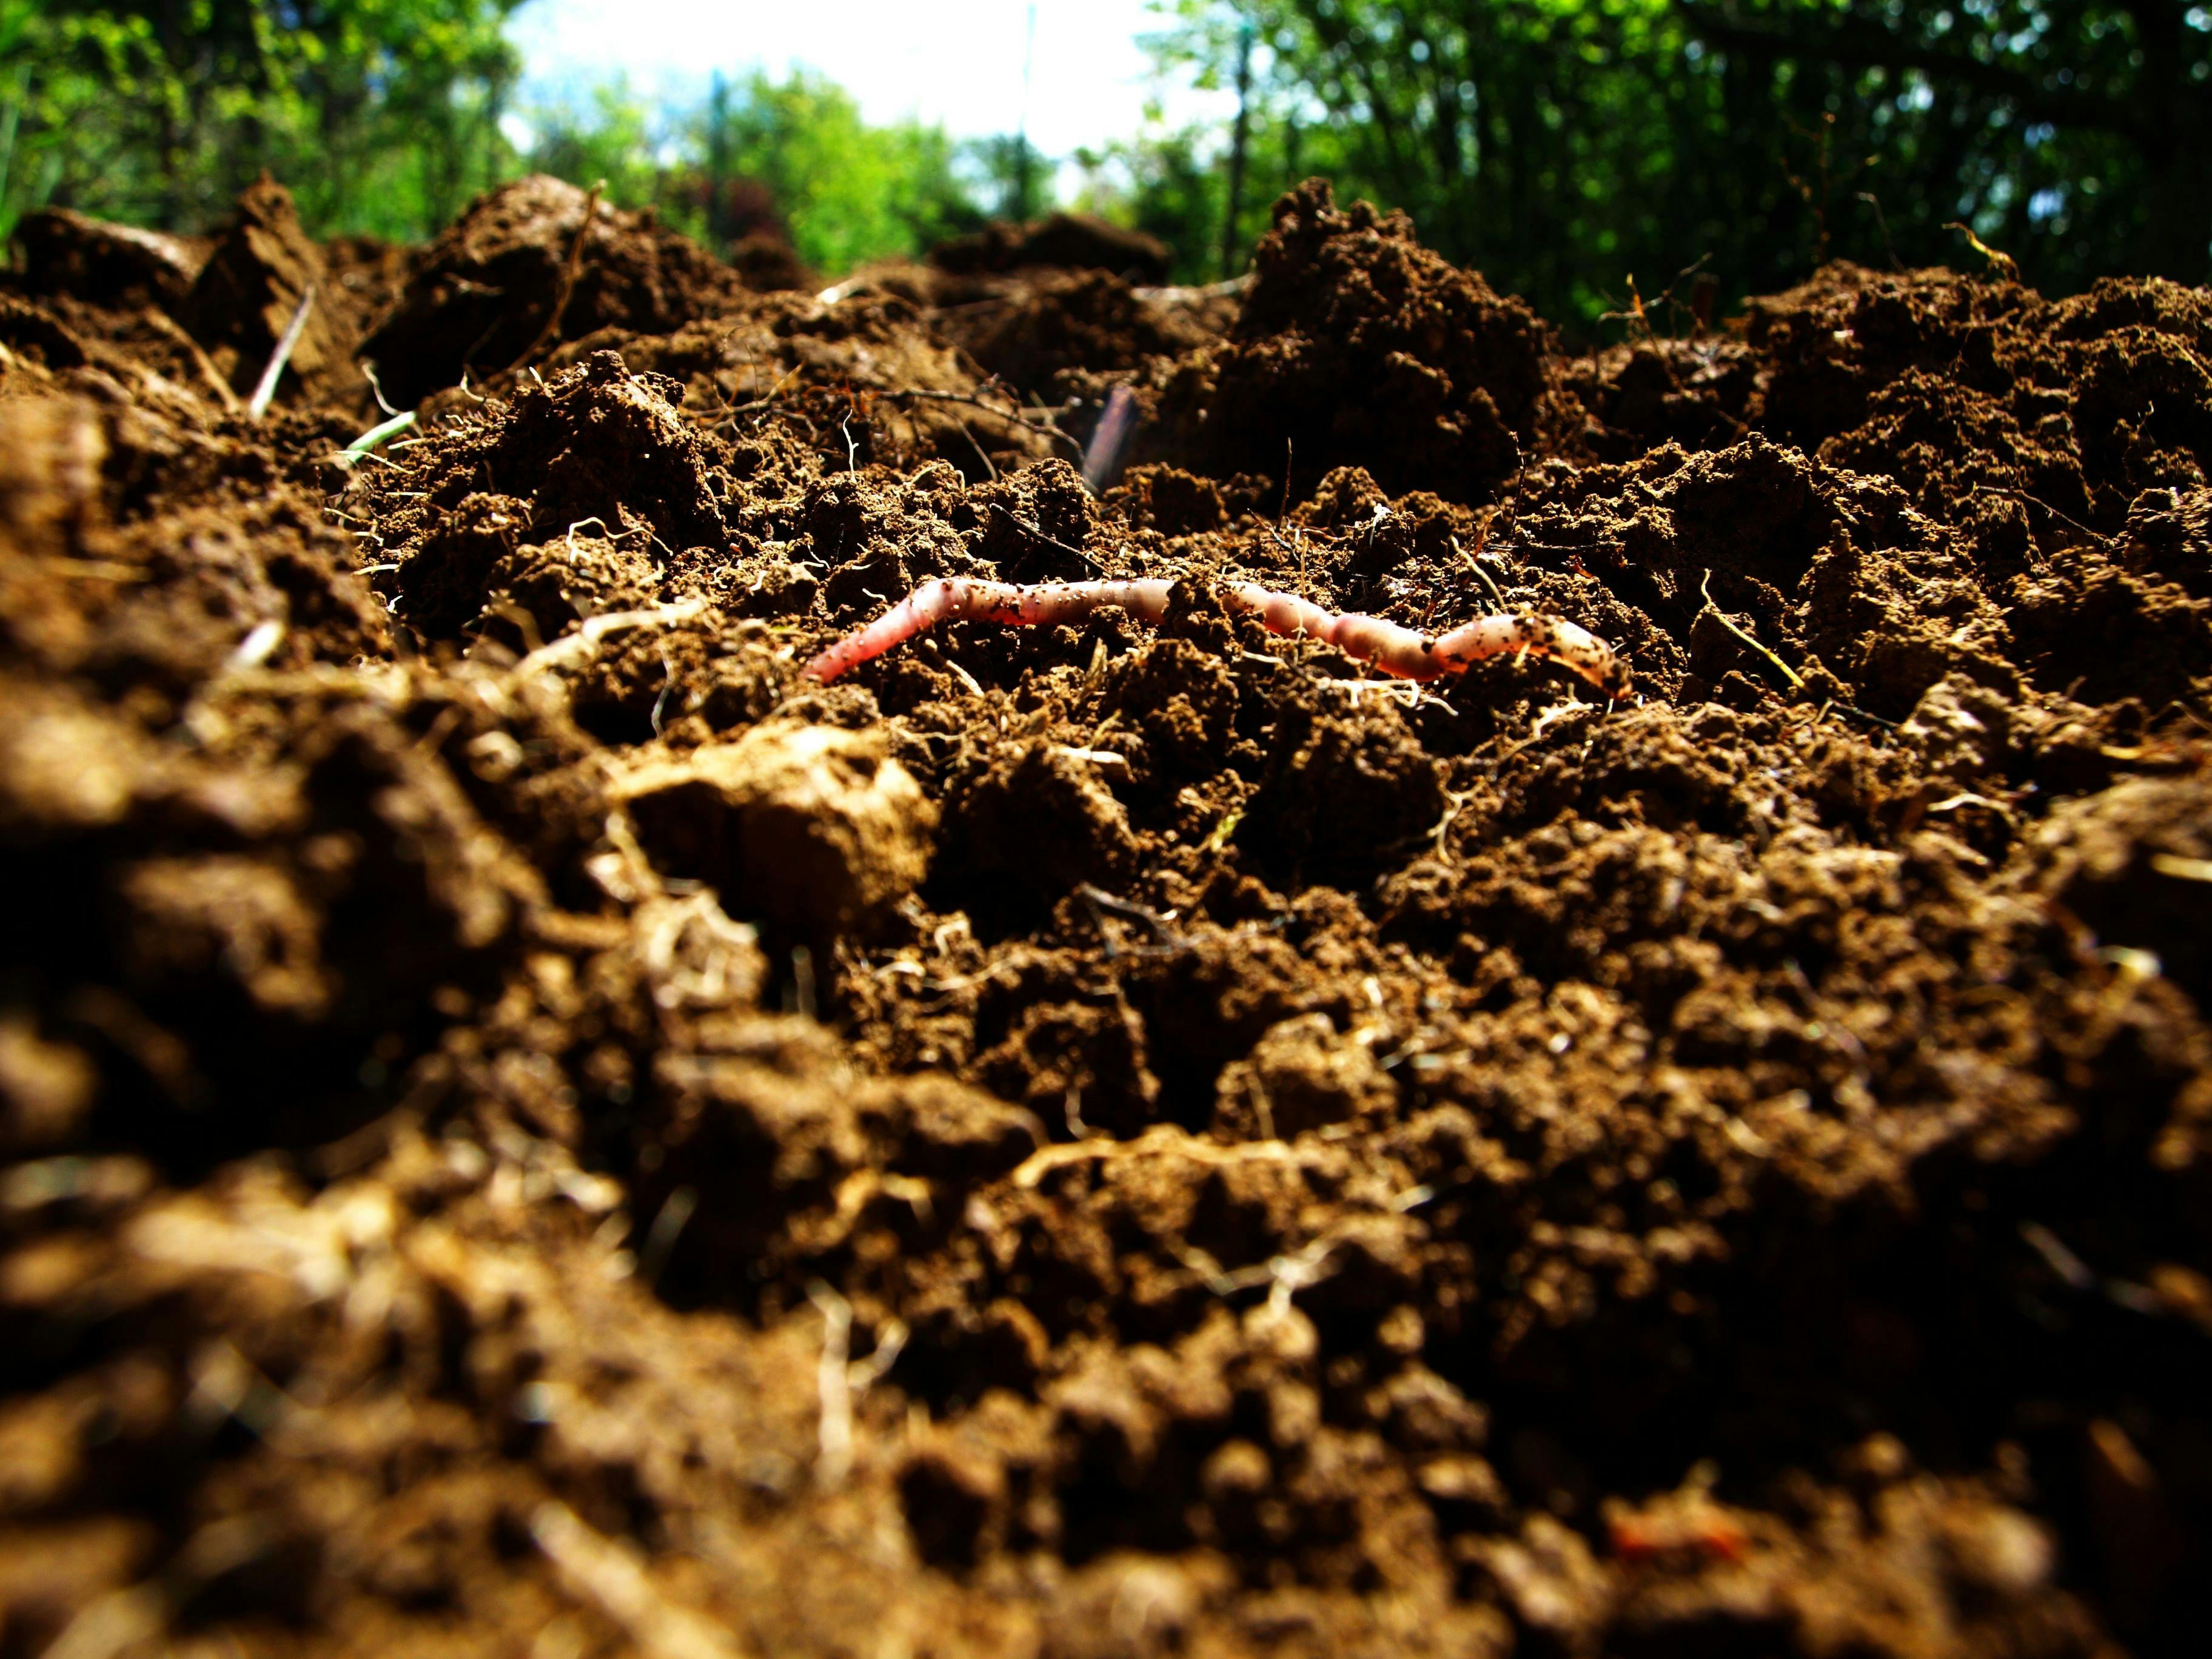 A close-up image of healthy soil with an earthworm and green trees in the background.